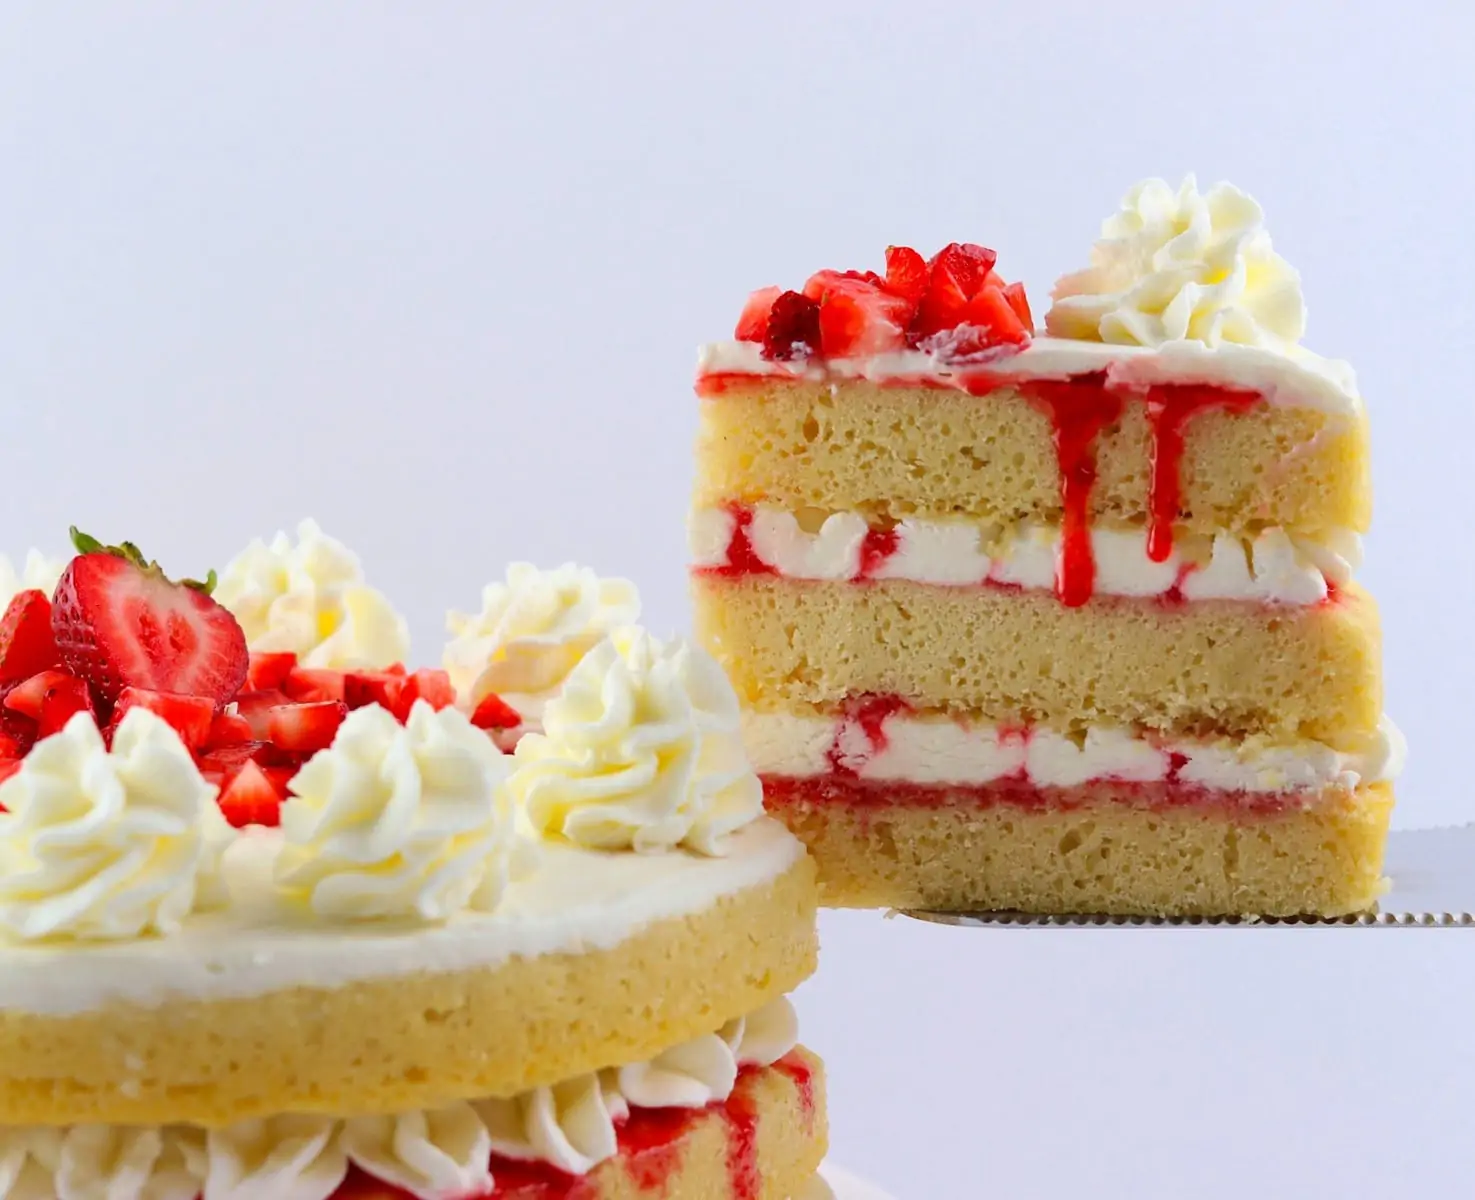 Slice of Cake with Strawberries